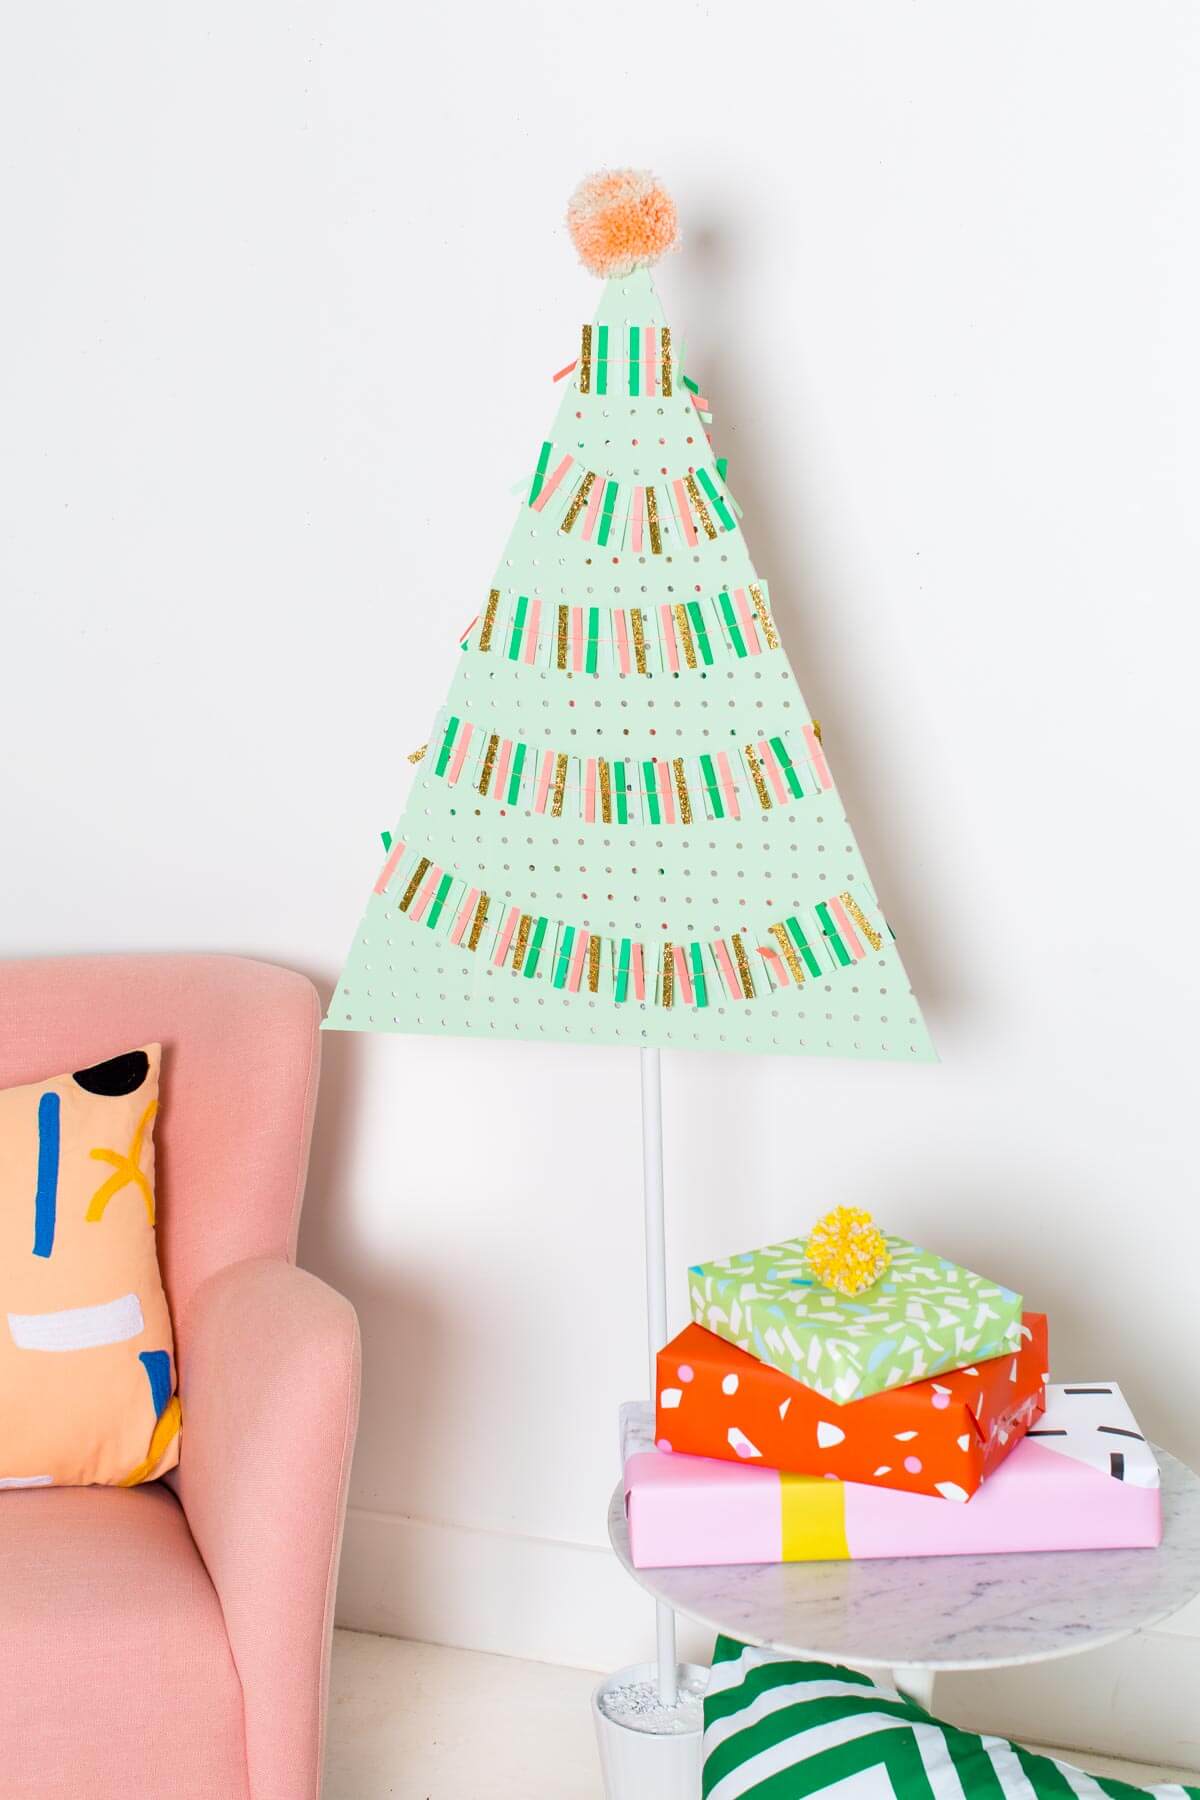 Pegboard Christmas Tree for Cards, Artwork or Ornaments